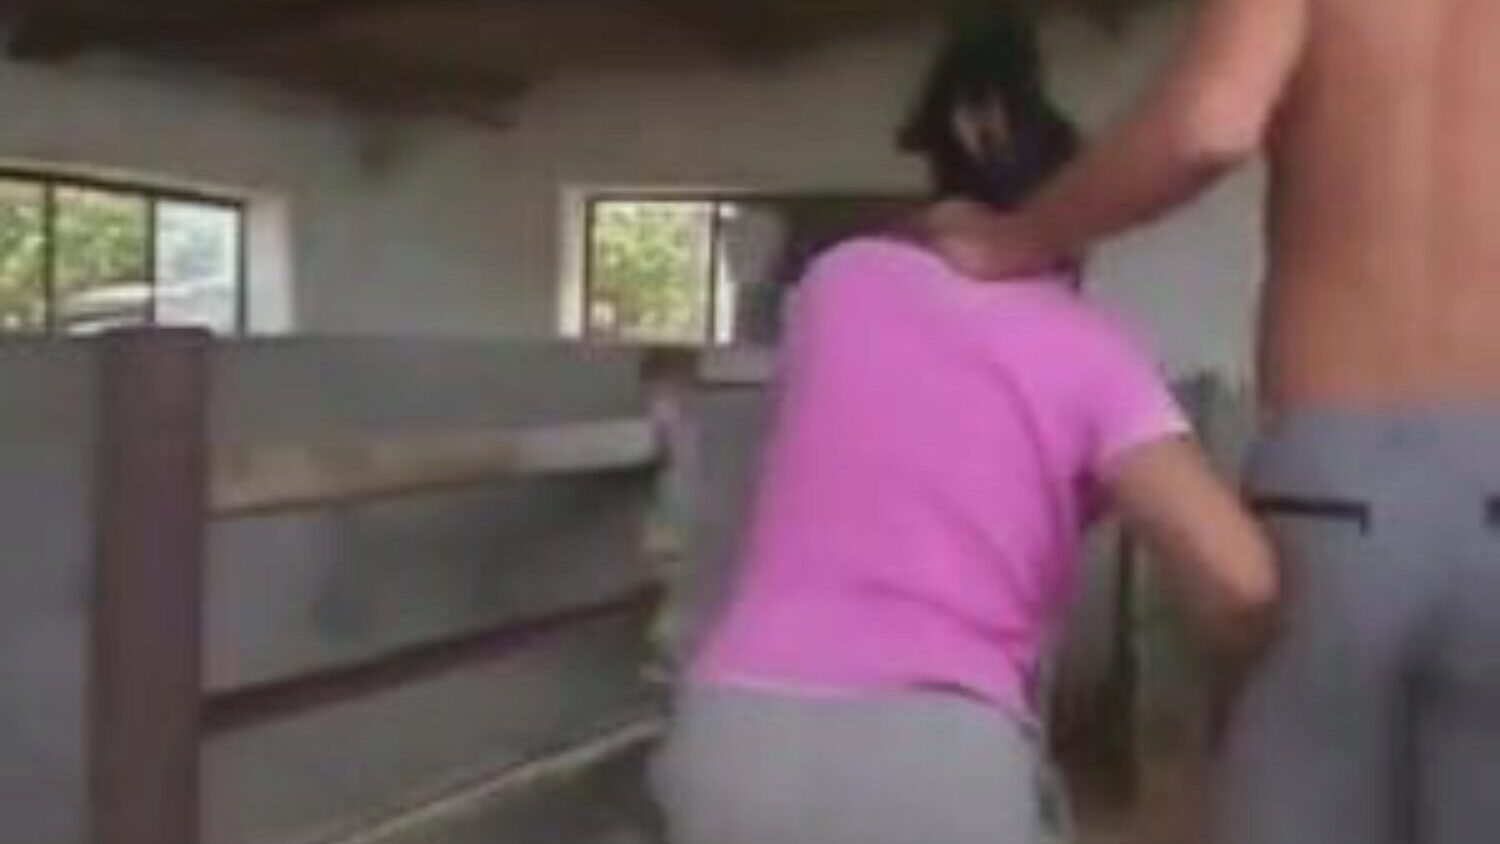 Mom Son in Farm: Free MILF Porn Video c7 - xHamster Watch Mom Son in Farm tube fuckfest movie for free-for-all on xHamster, with the finest collection of Egyptian Arab, MILF & Mom Mobile Tube pornography clip sequences